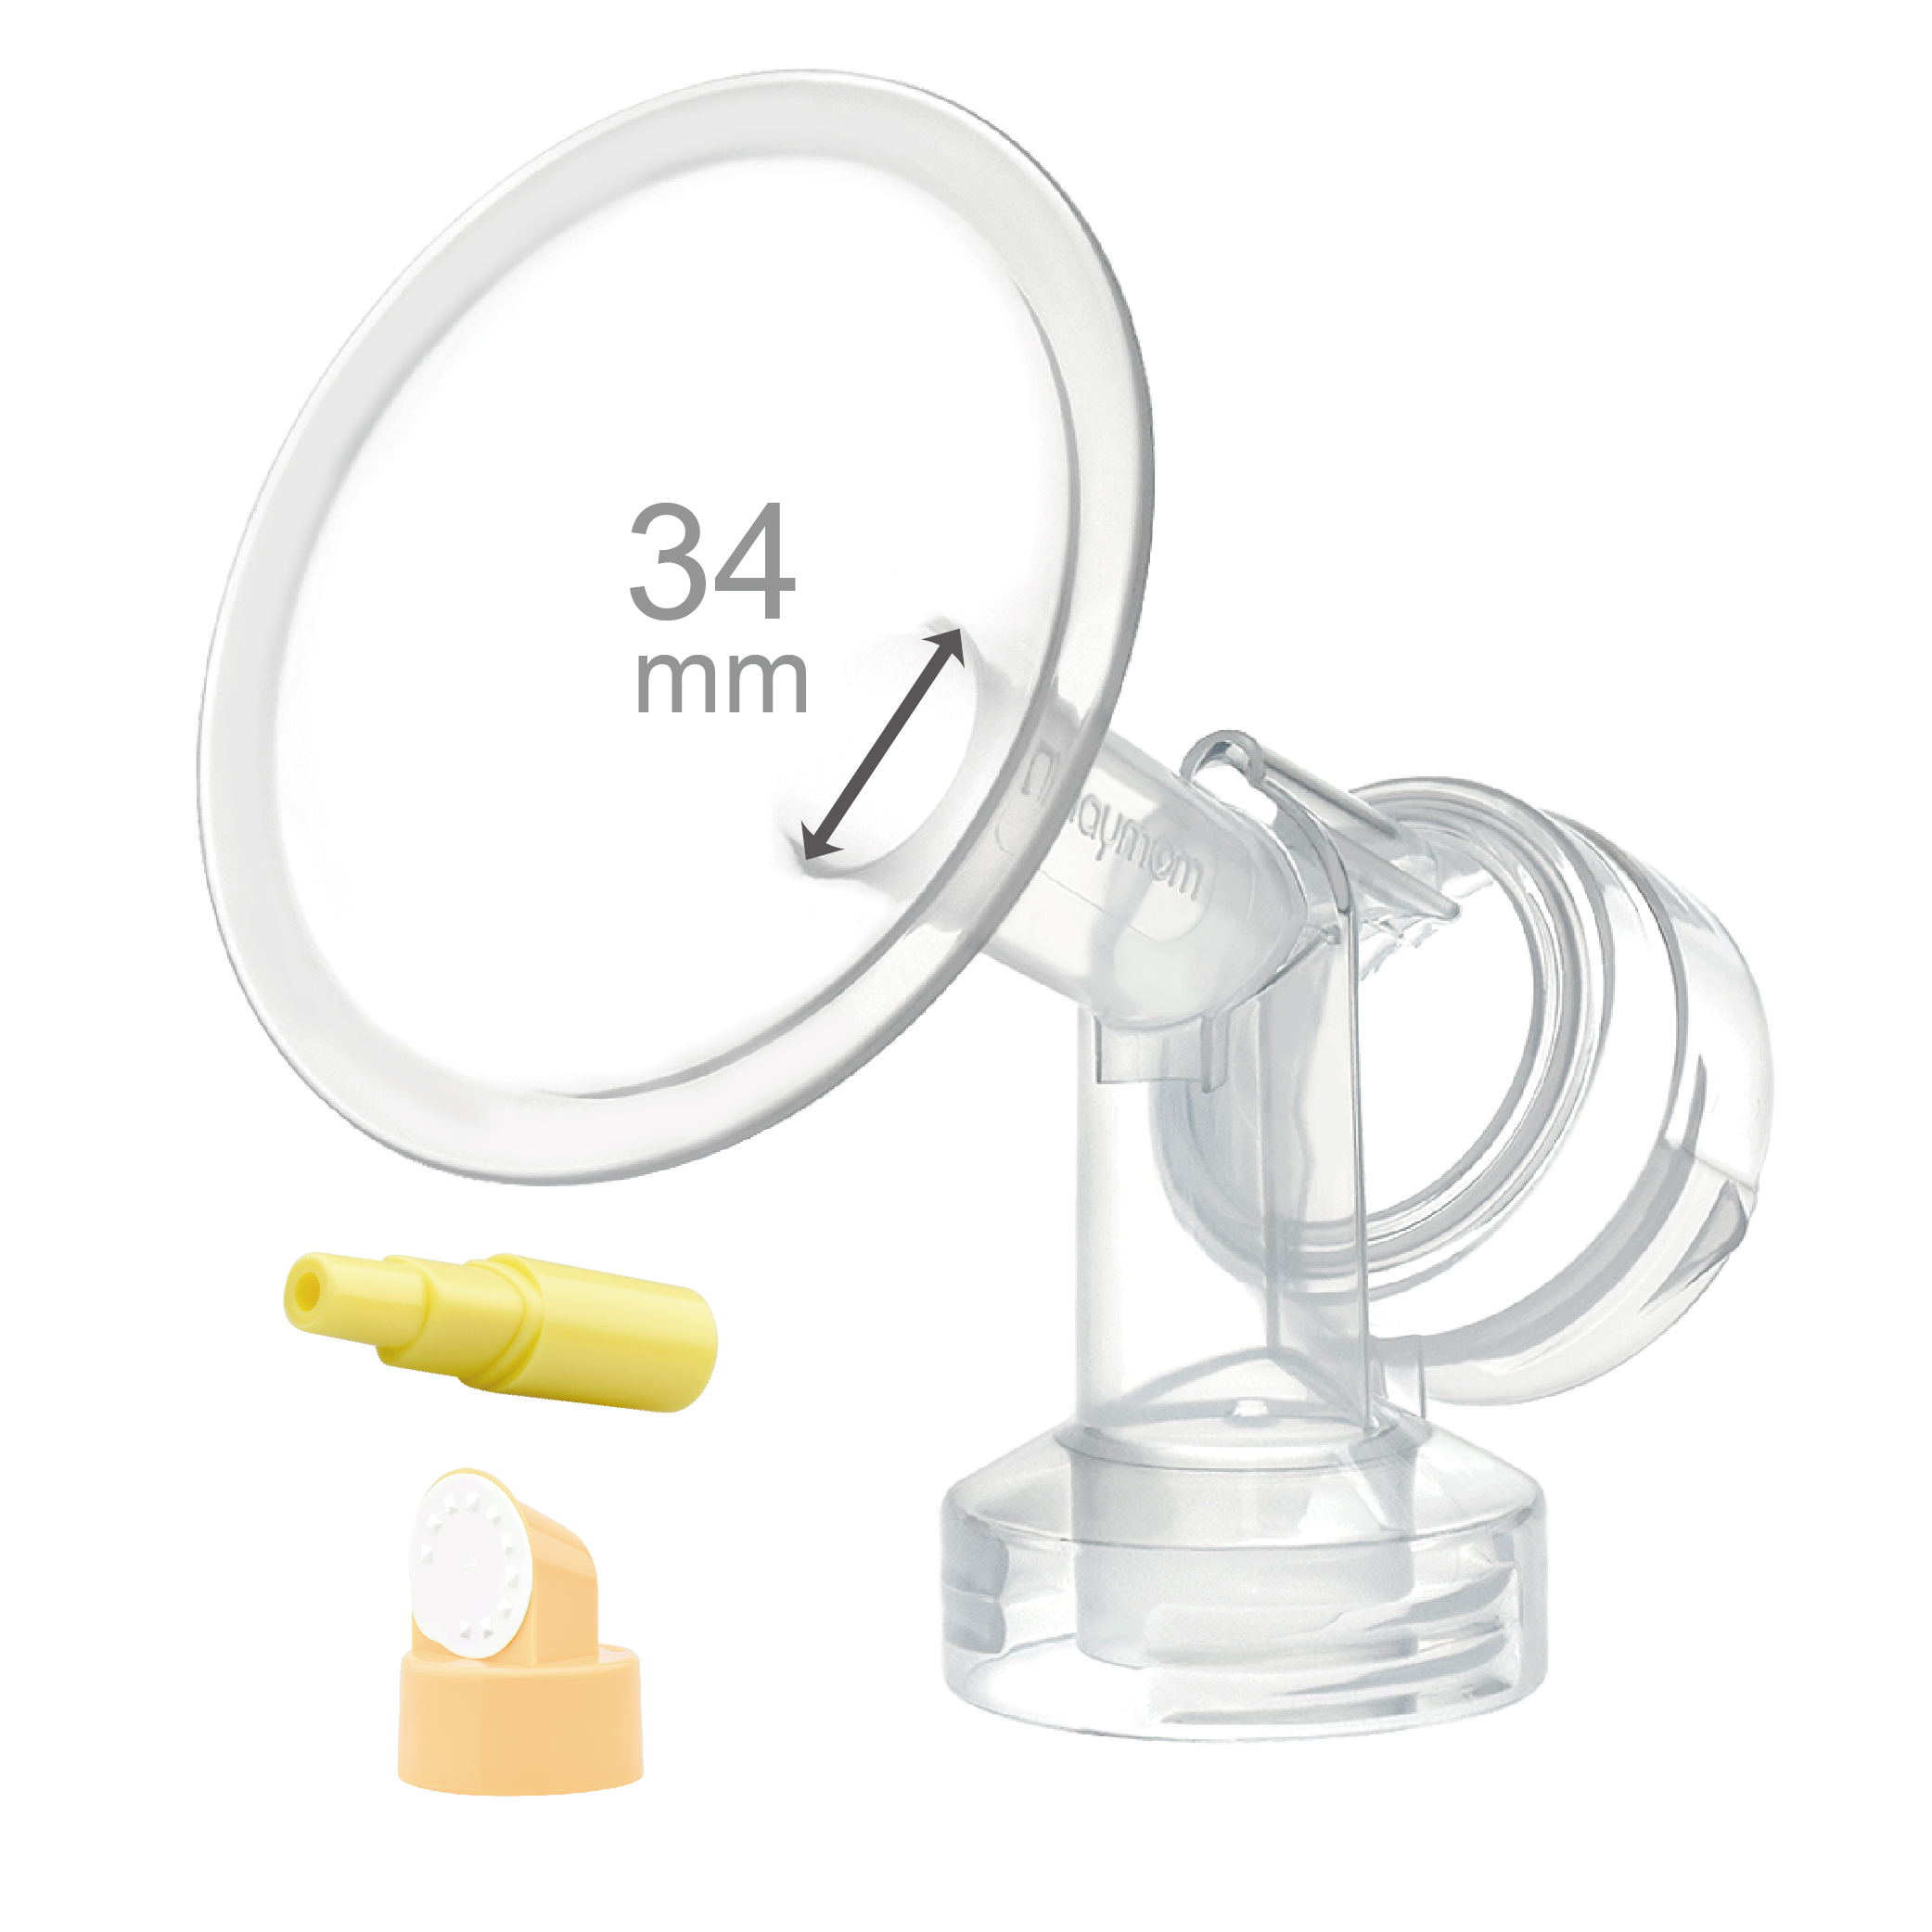 34 mm Extra Small Flange w/ Valve and Membrane for SpeCtra Breast Pumps S1, S2, M1, Spectra 9; Narrow (Standard) Bottle Neck;